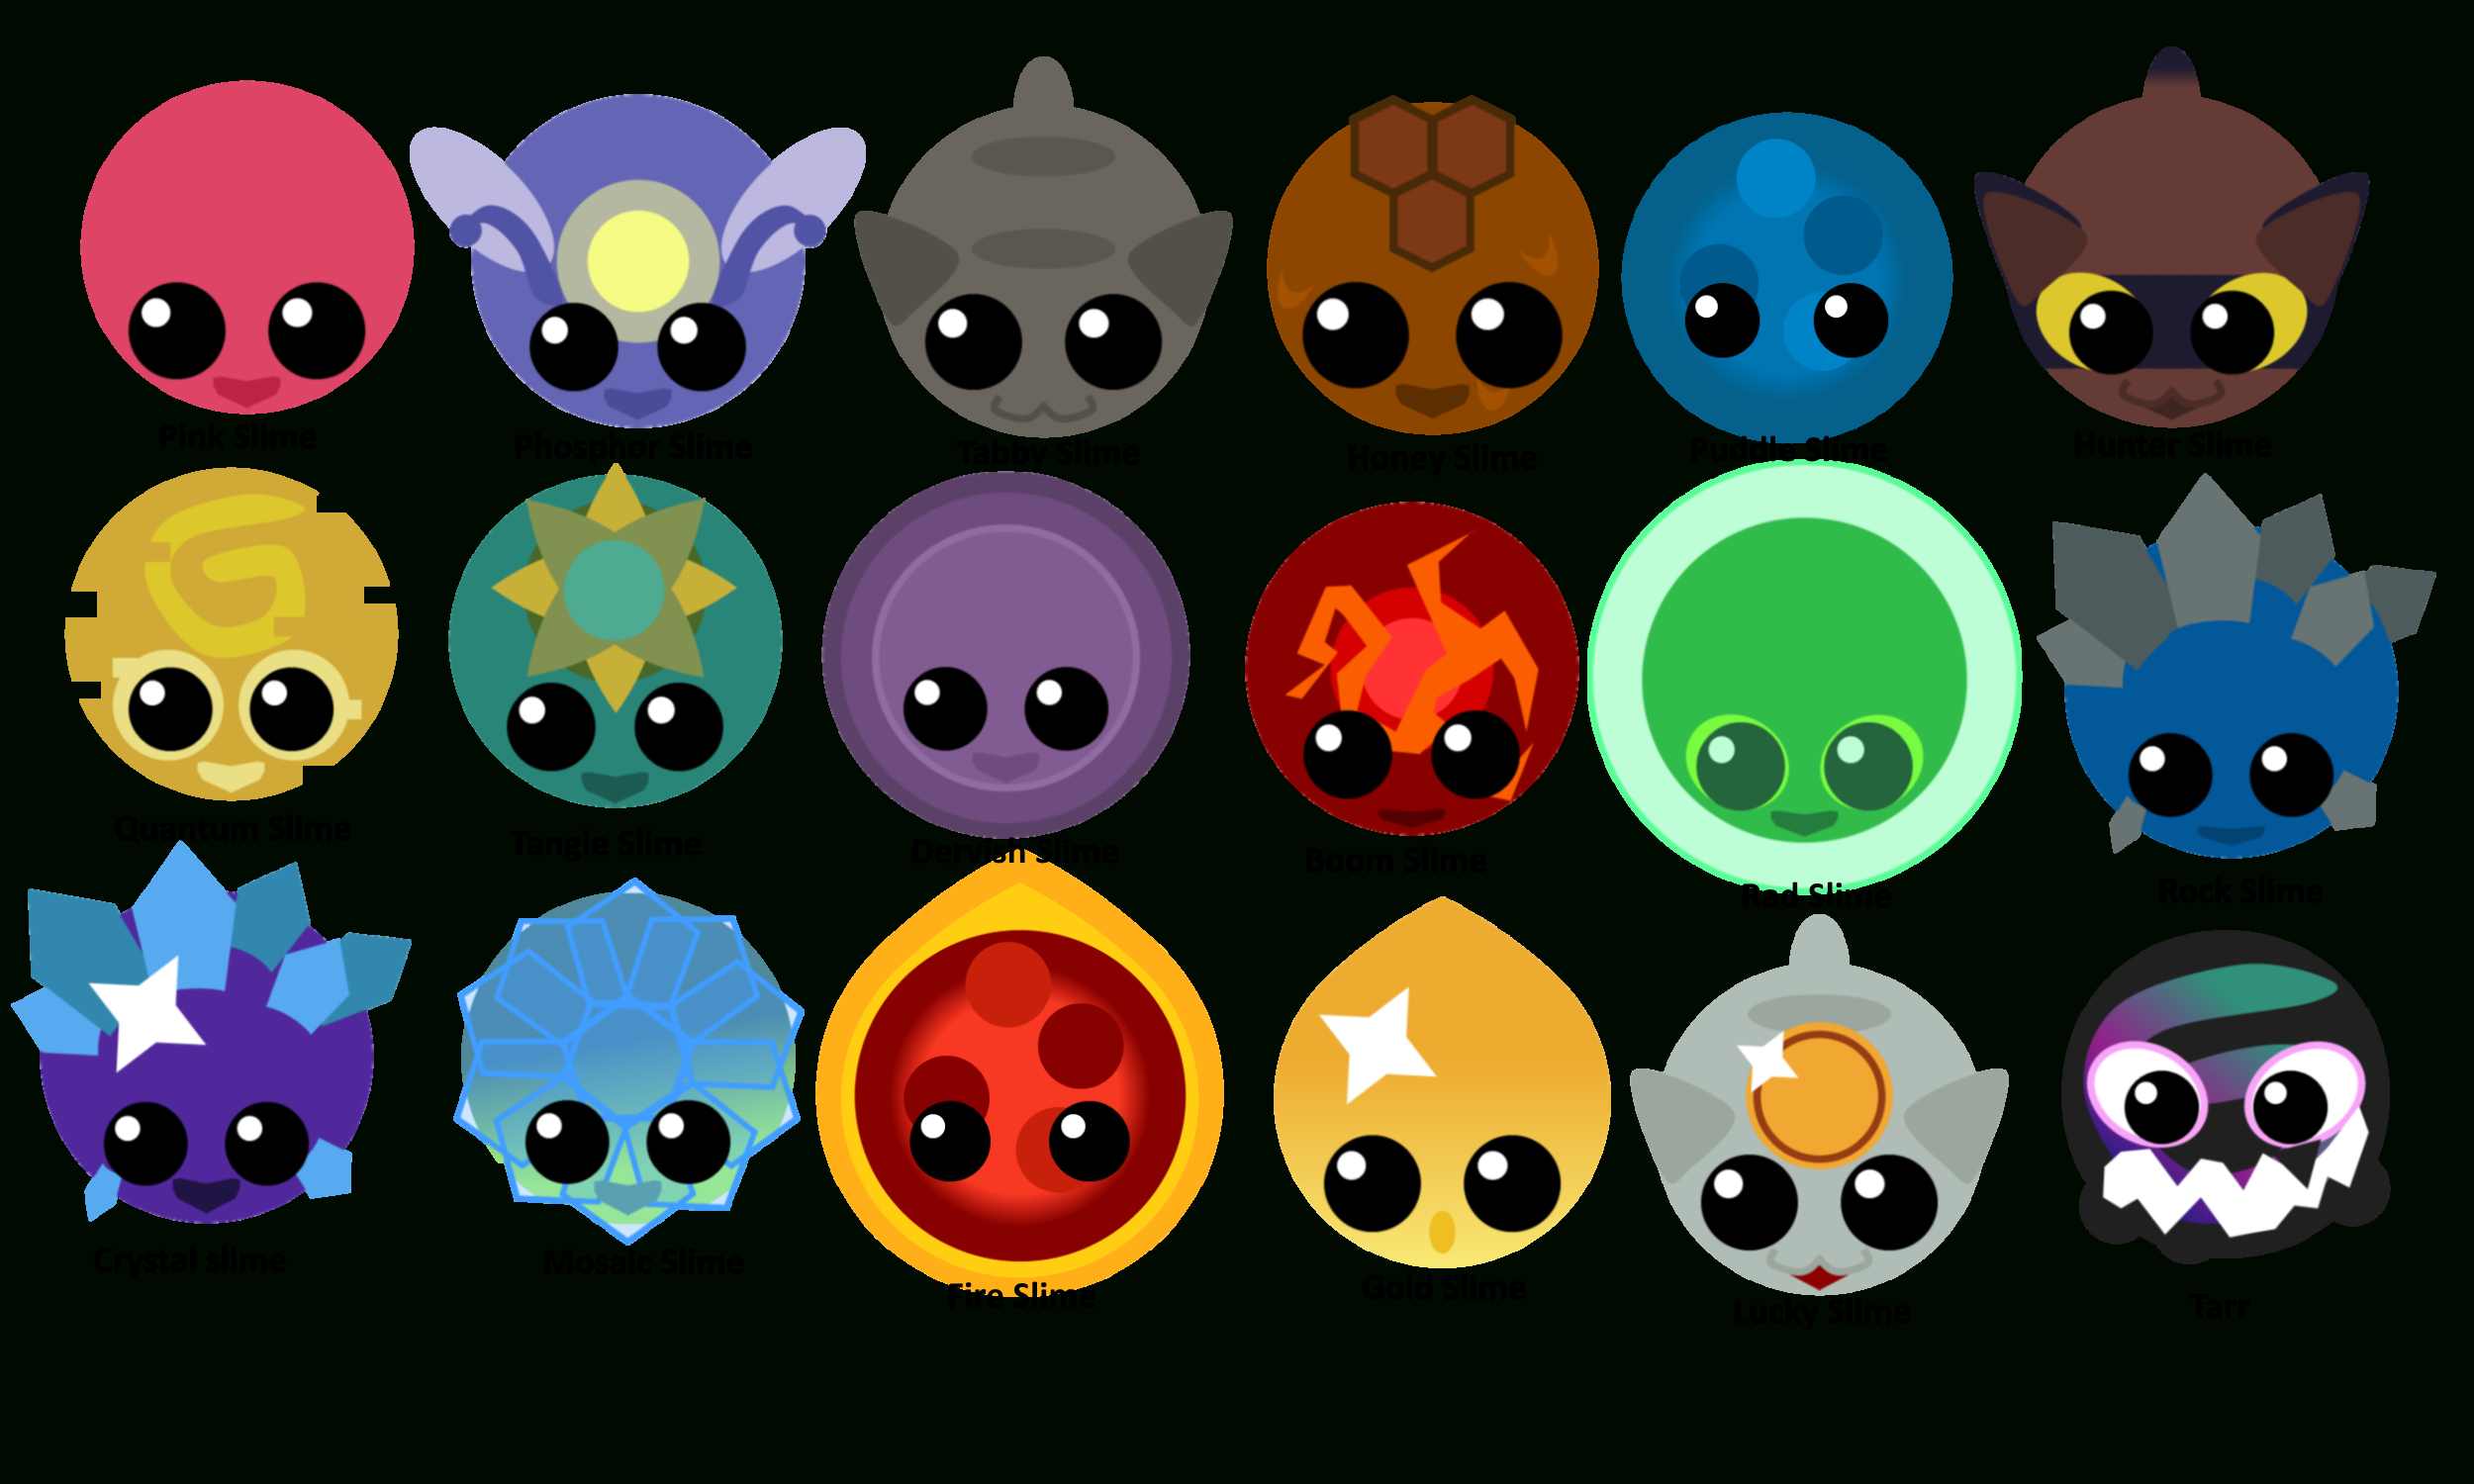 Slime Rancher Slimes In The Style Of Mope.io : Mopeio pour Reto De Slime Best New